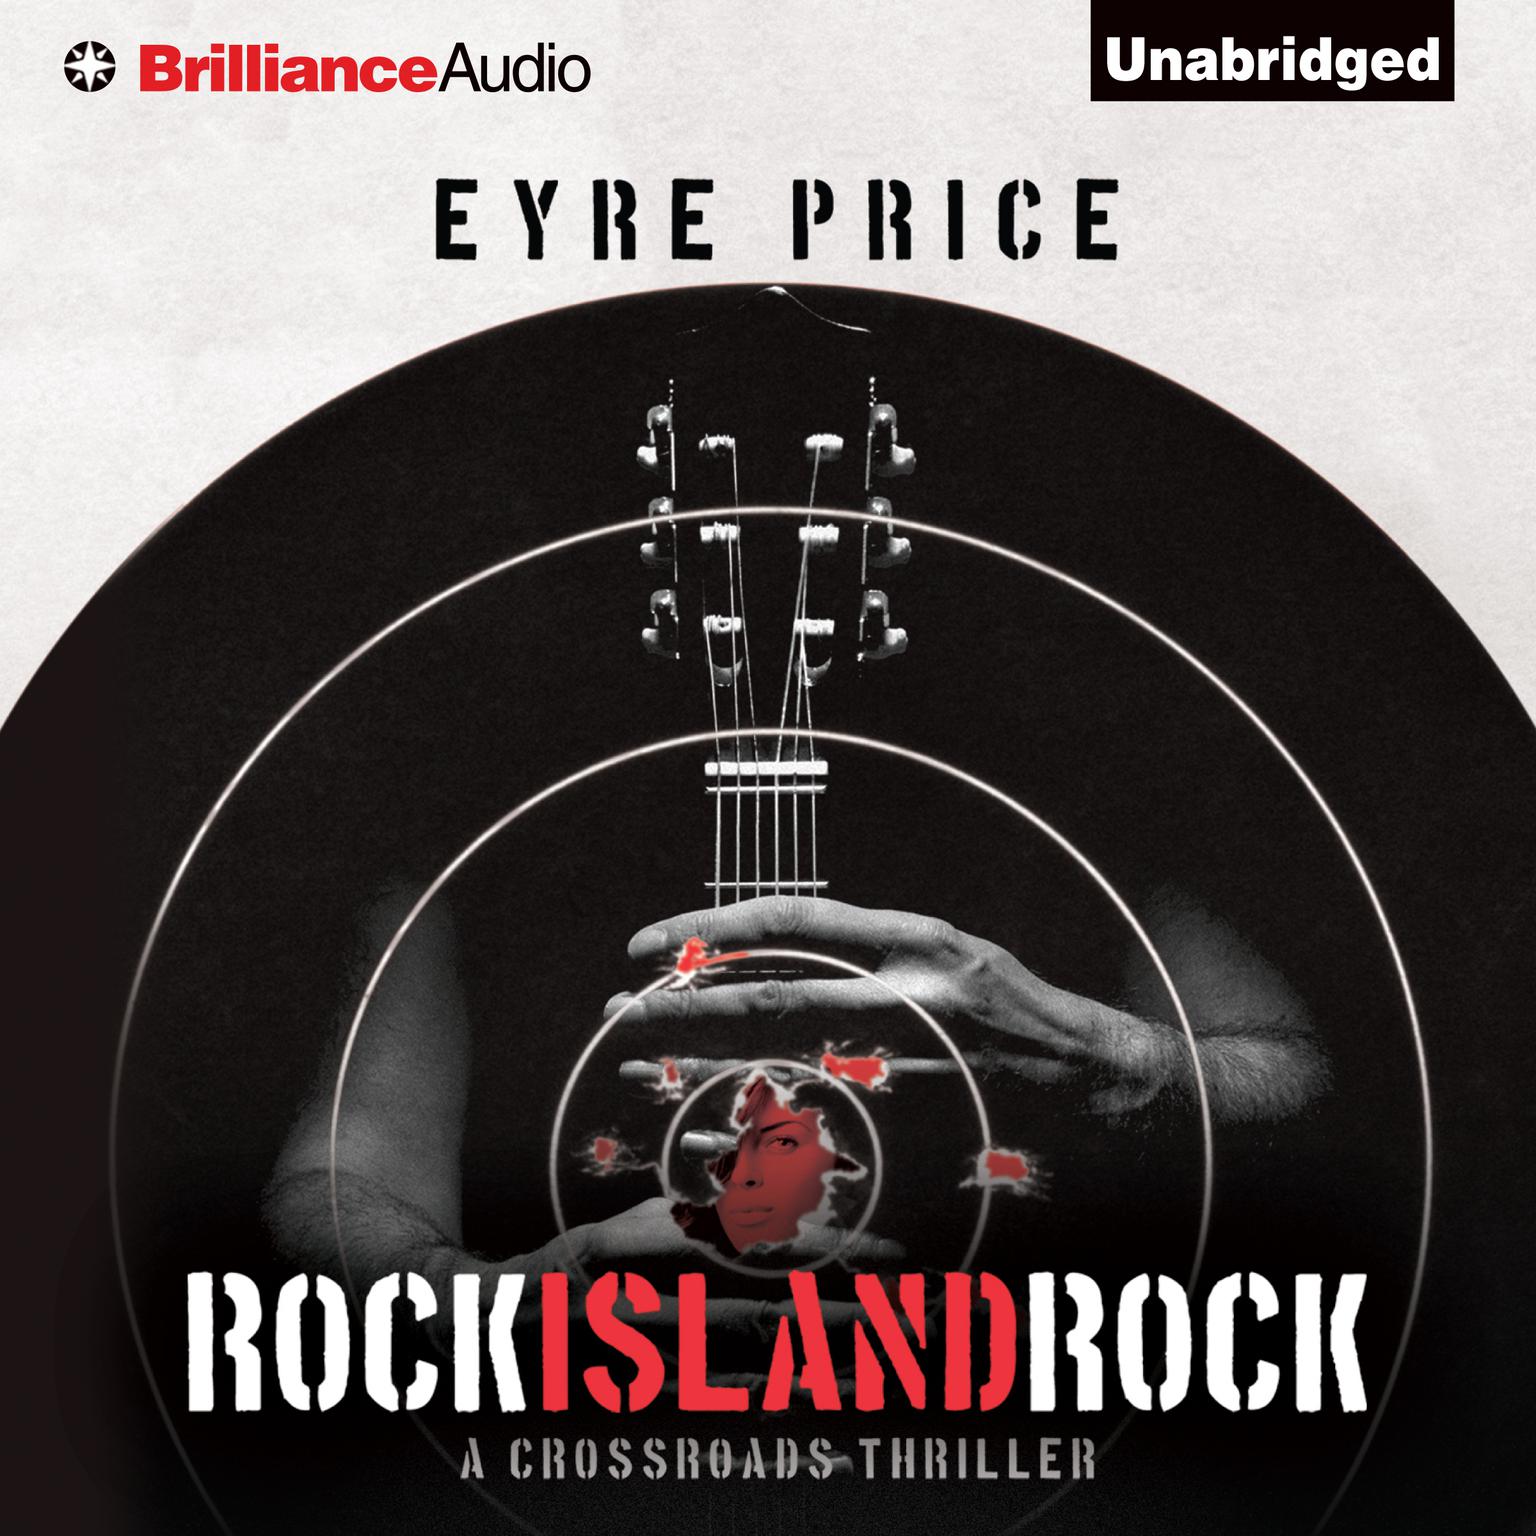 Rock Island Rock Audiobook, by Eyre Price